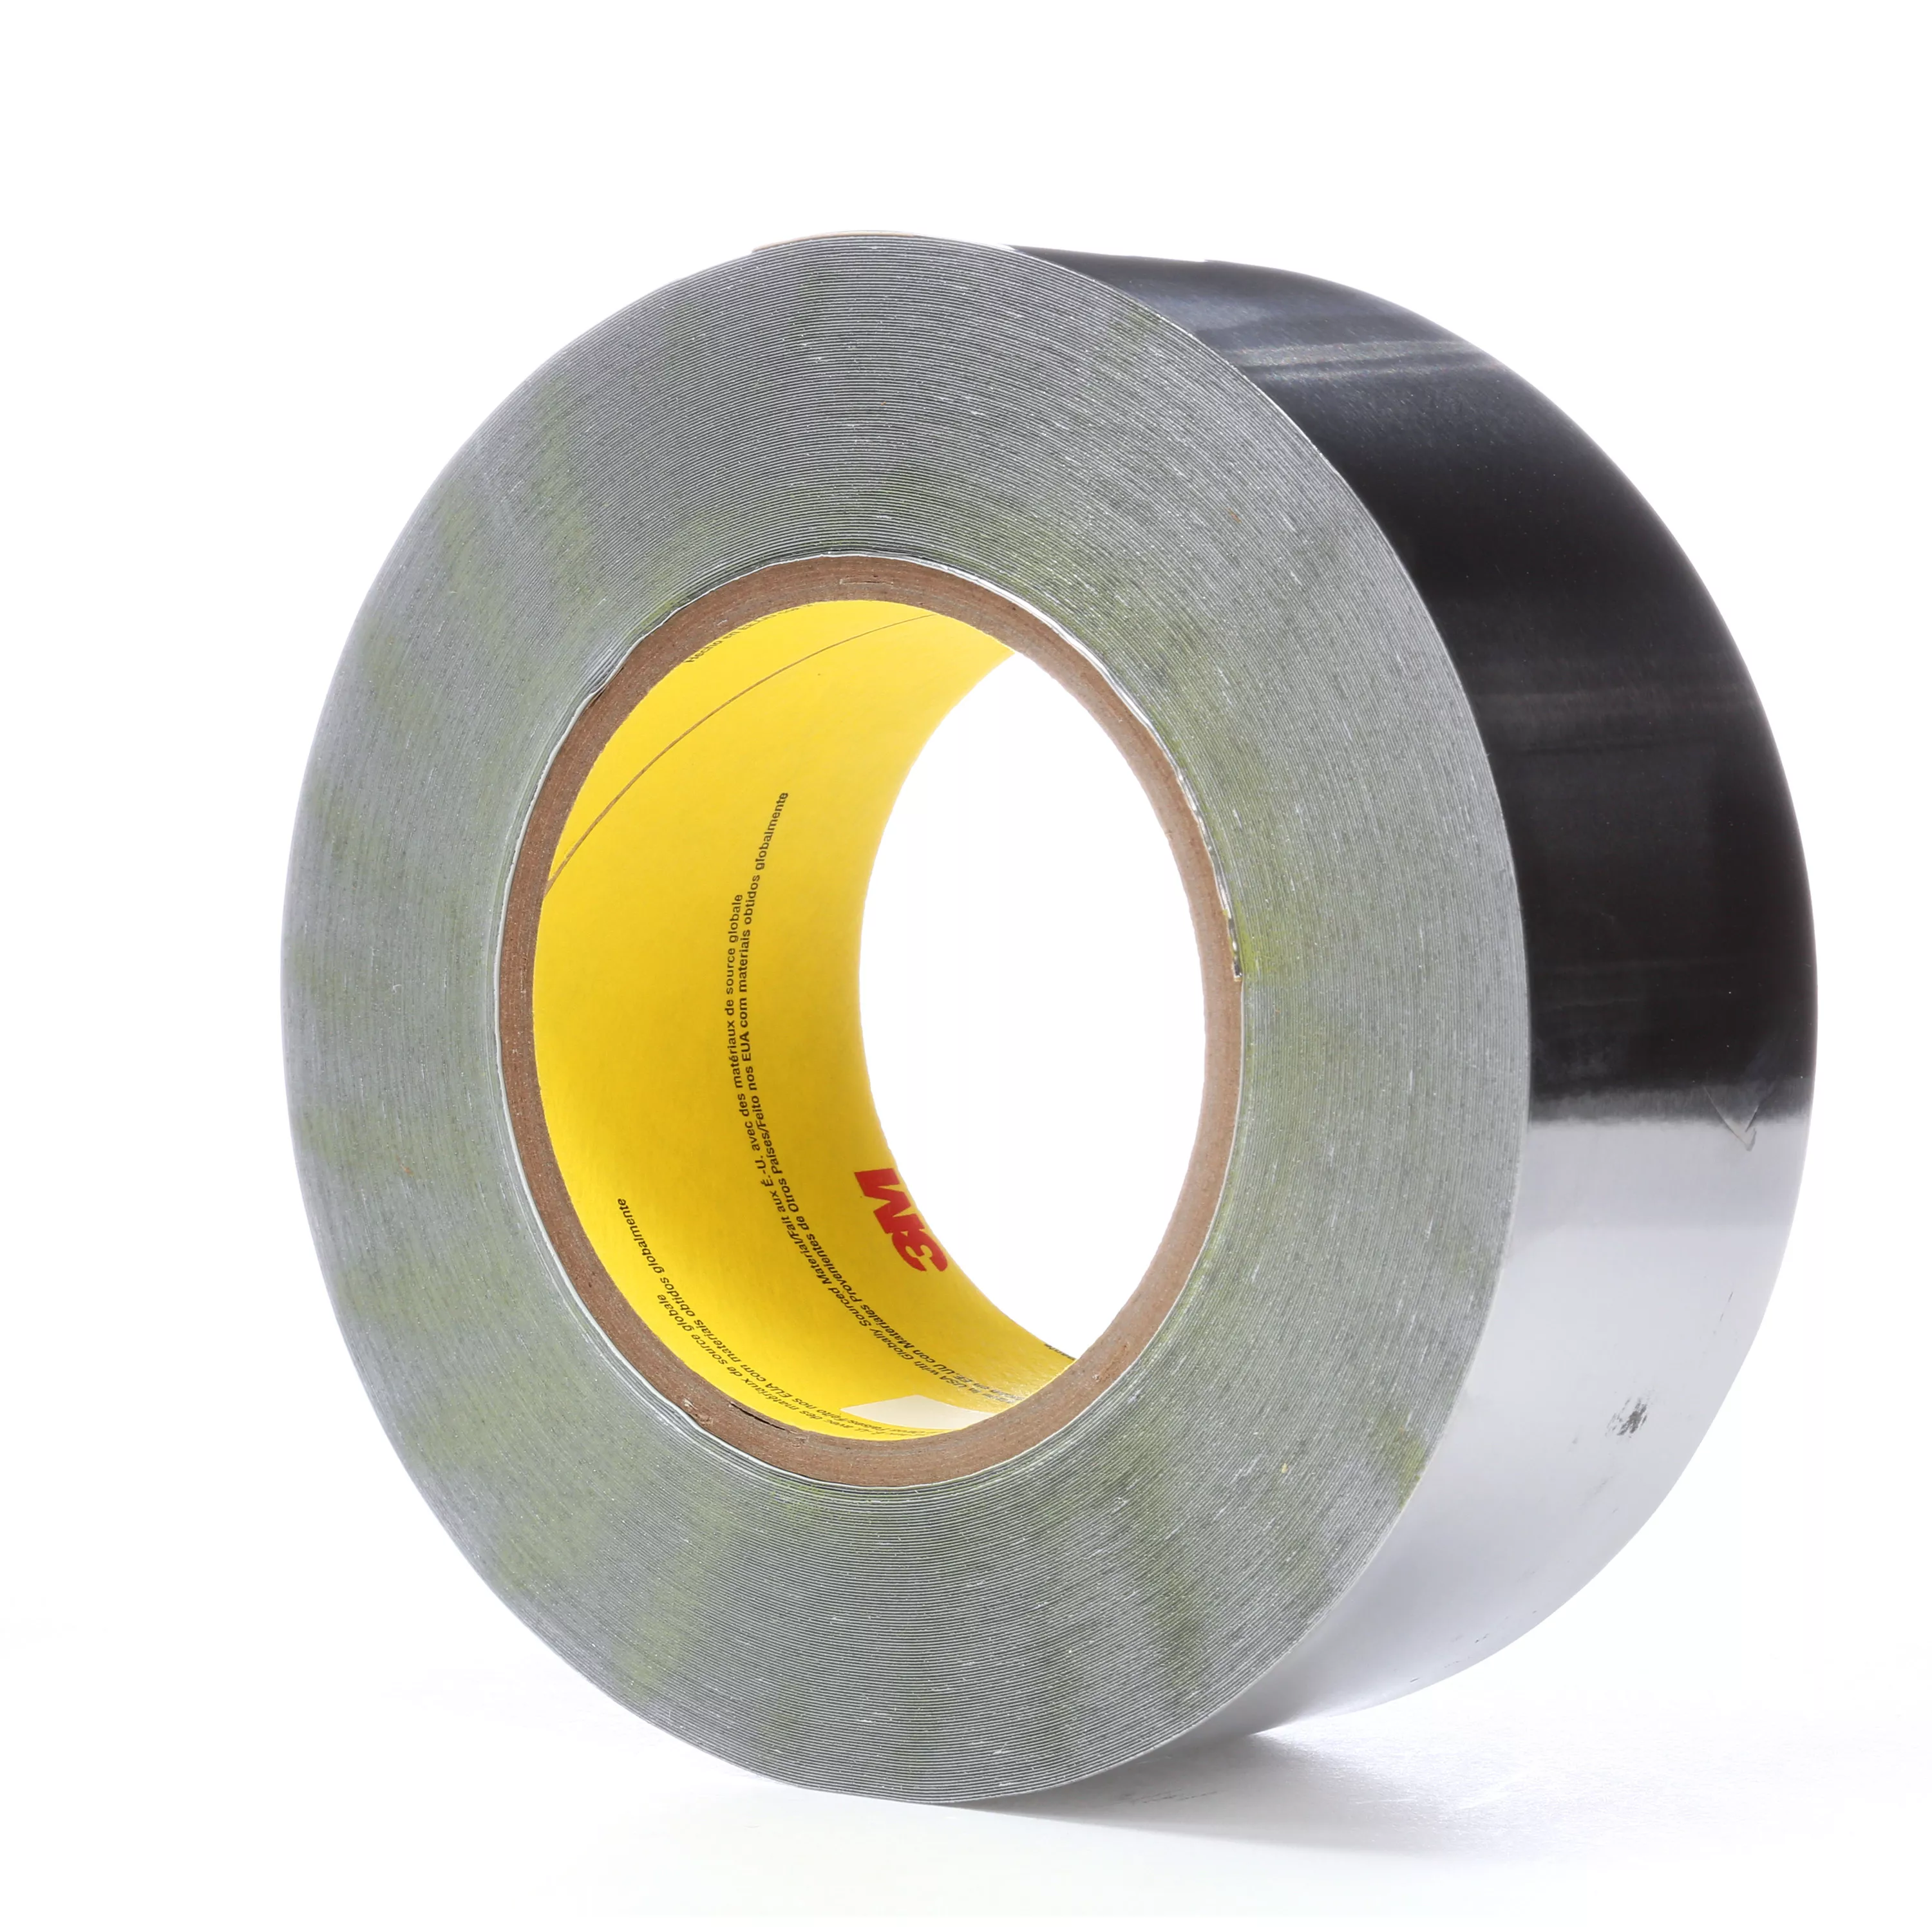 Product Number 420 | 3M™ Lead Foil Tape 420